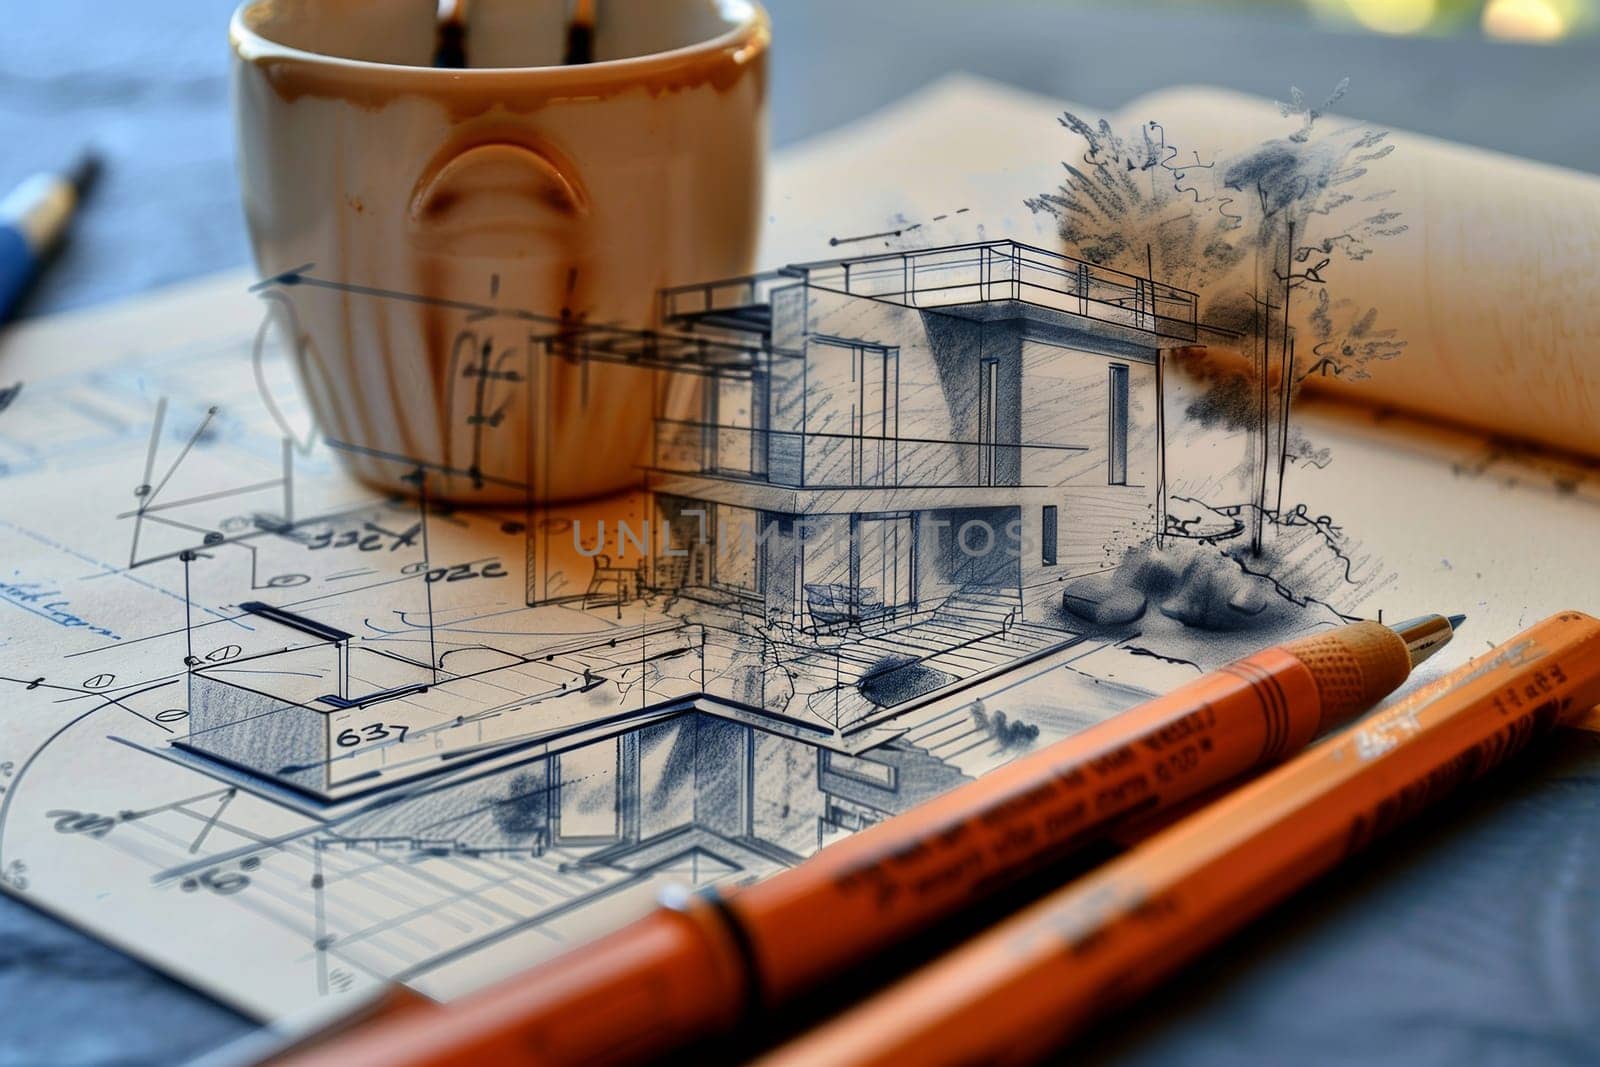 A cup of coffee rests gracefully on top of a blueprint filled with project renovation sketches, plans, and design ideas.